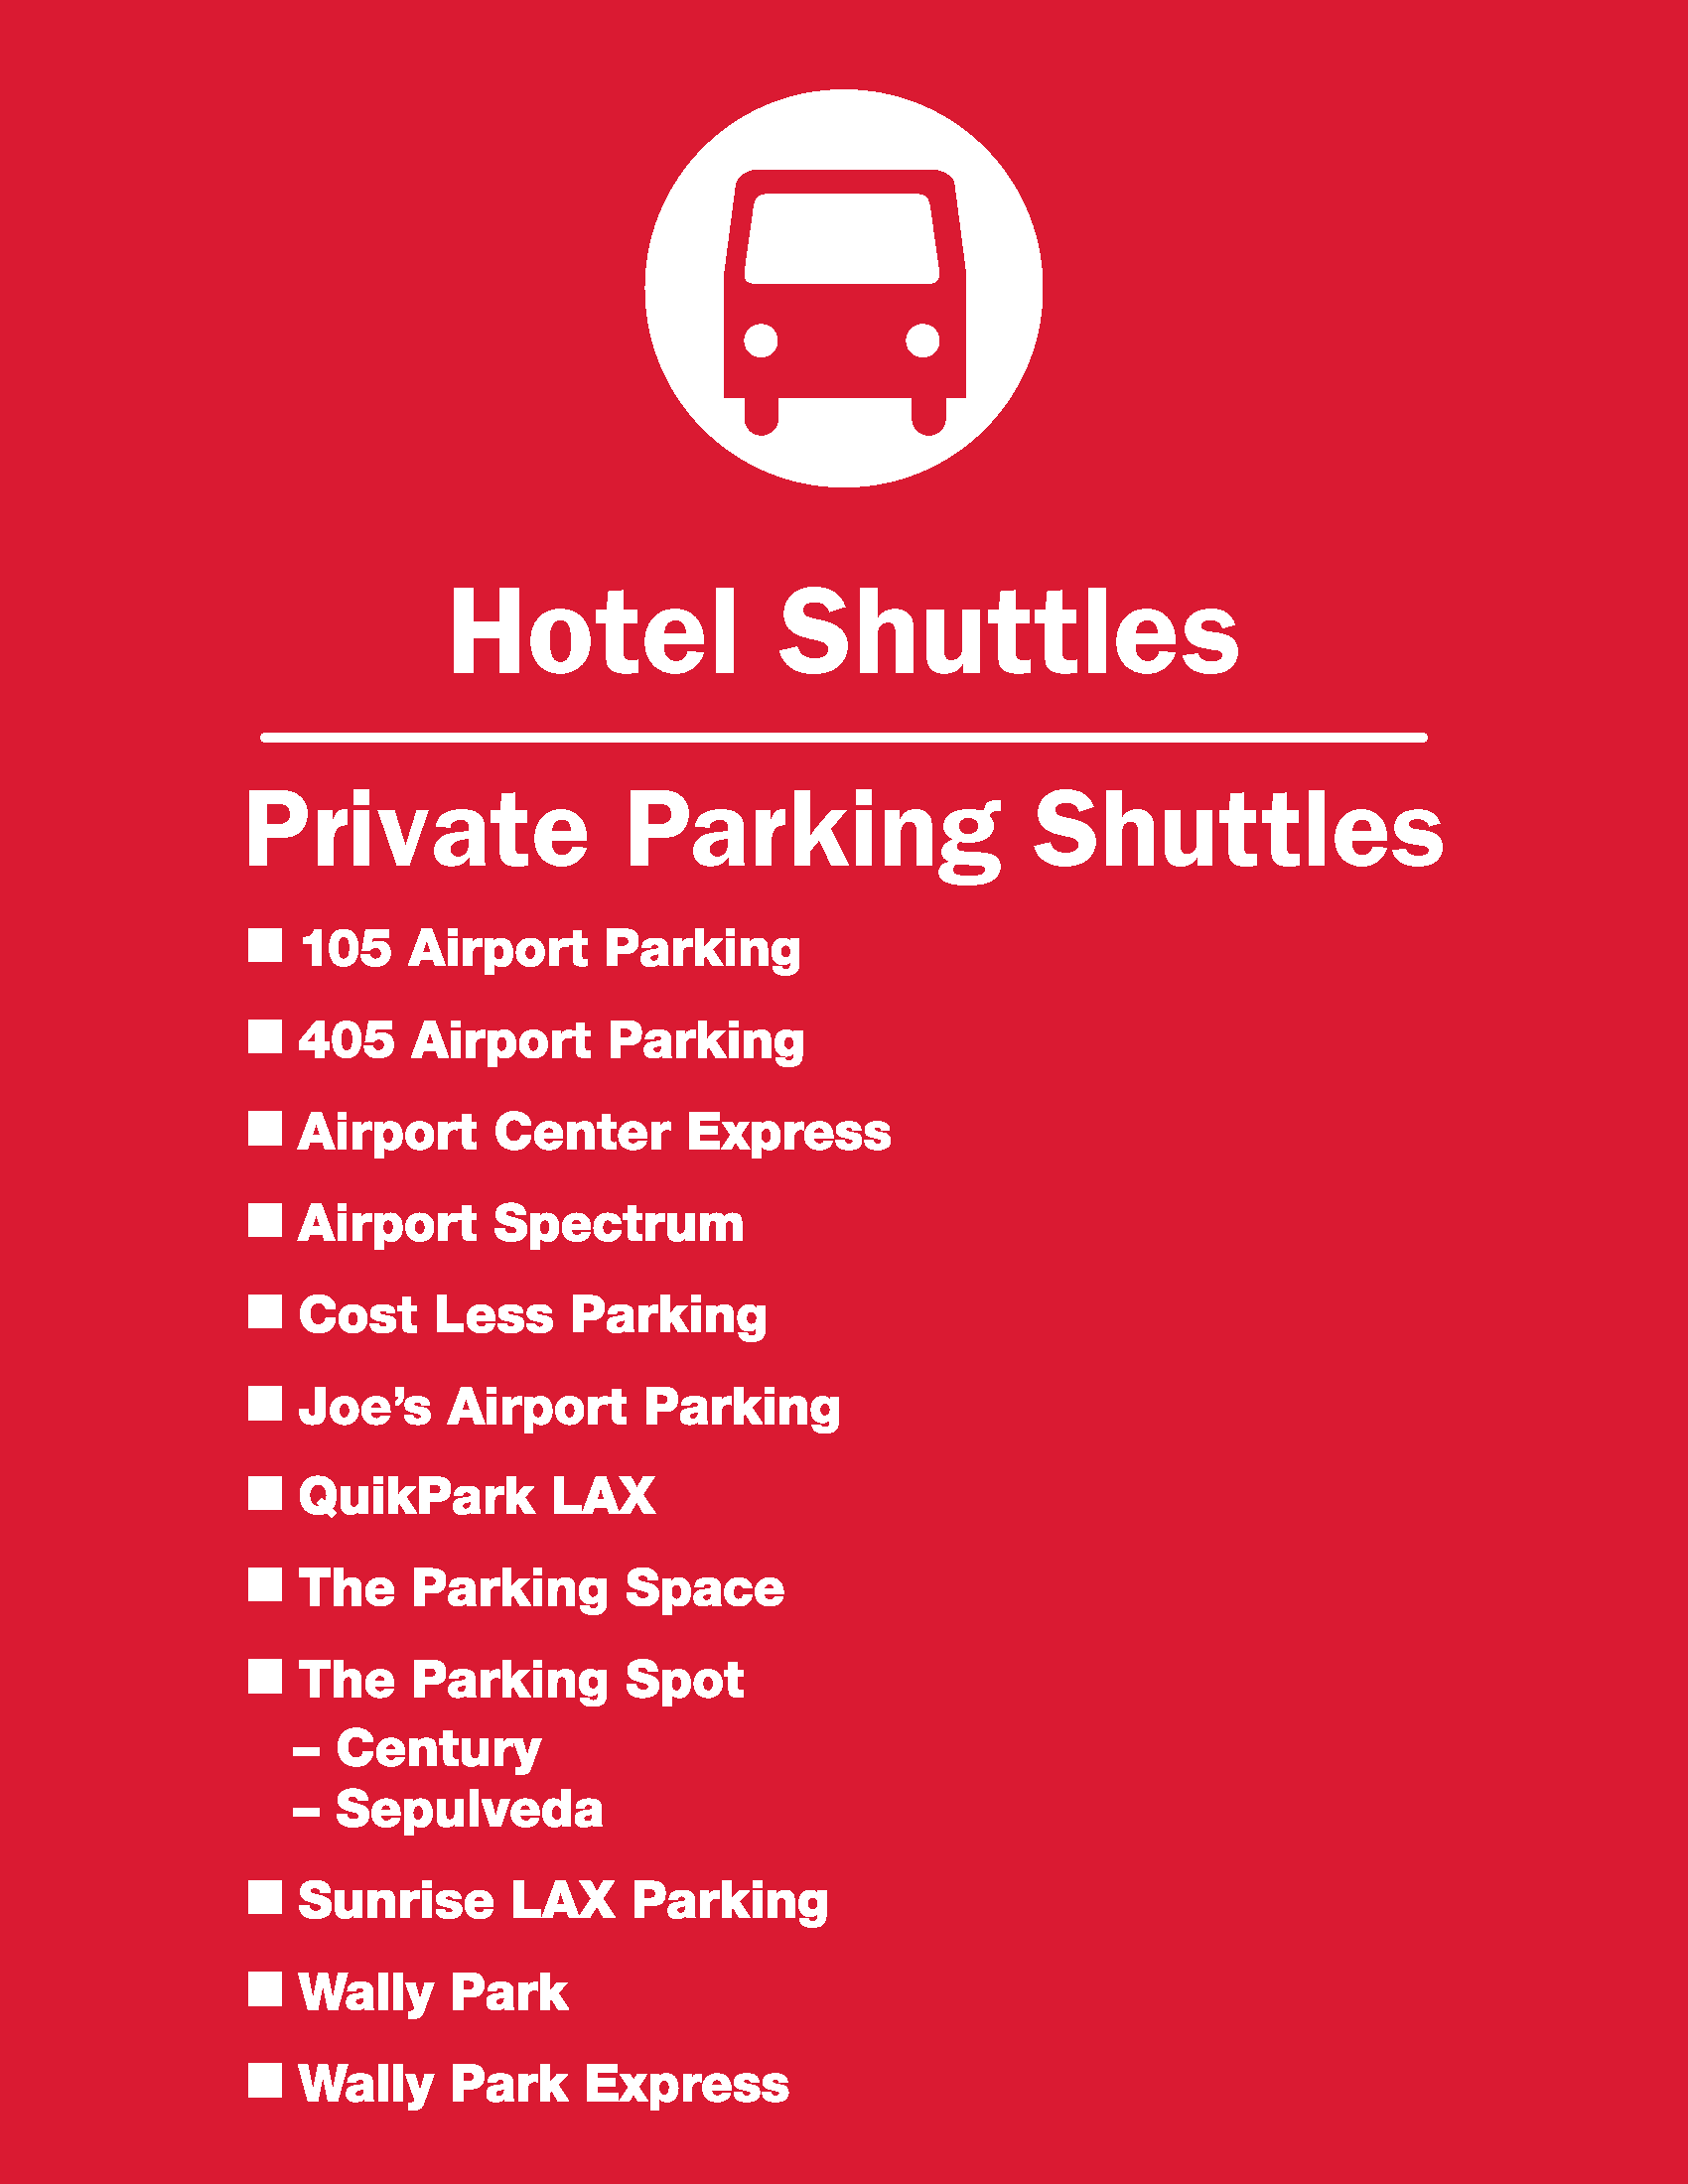 Sign of Hotel Shuttles & Private Parking Shuttles